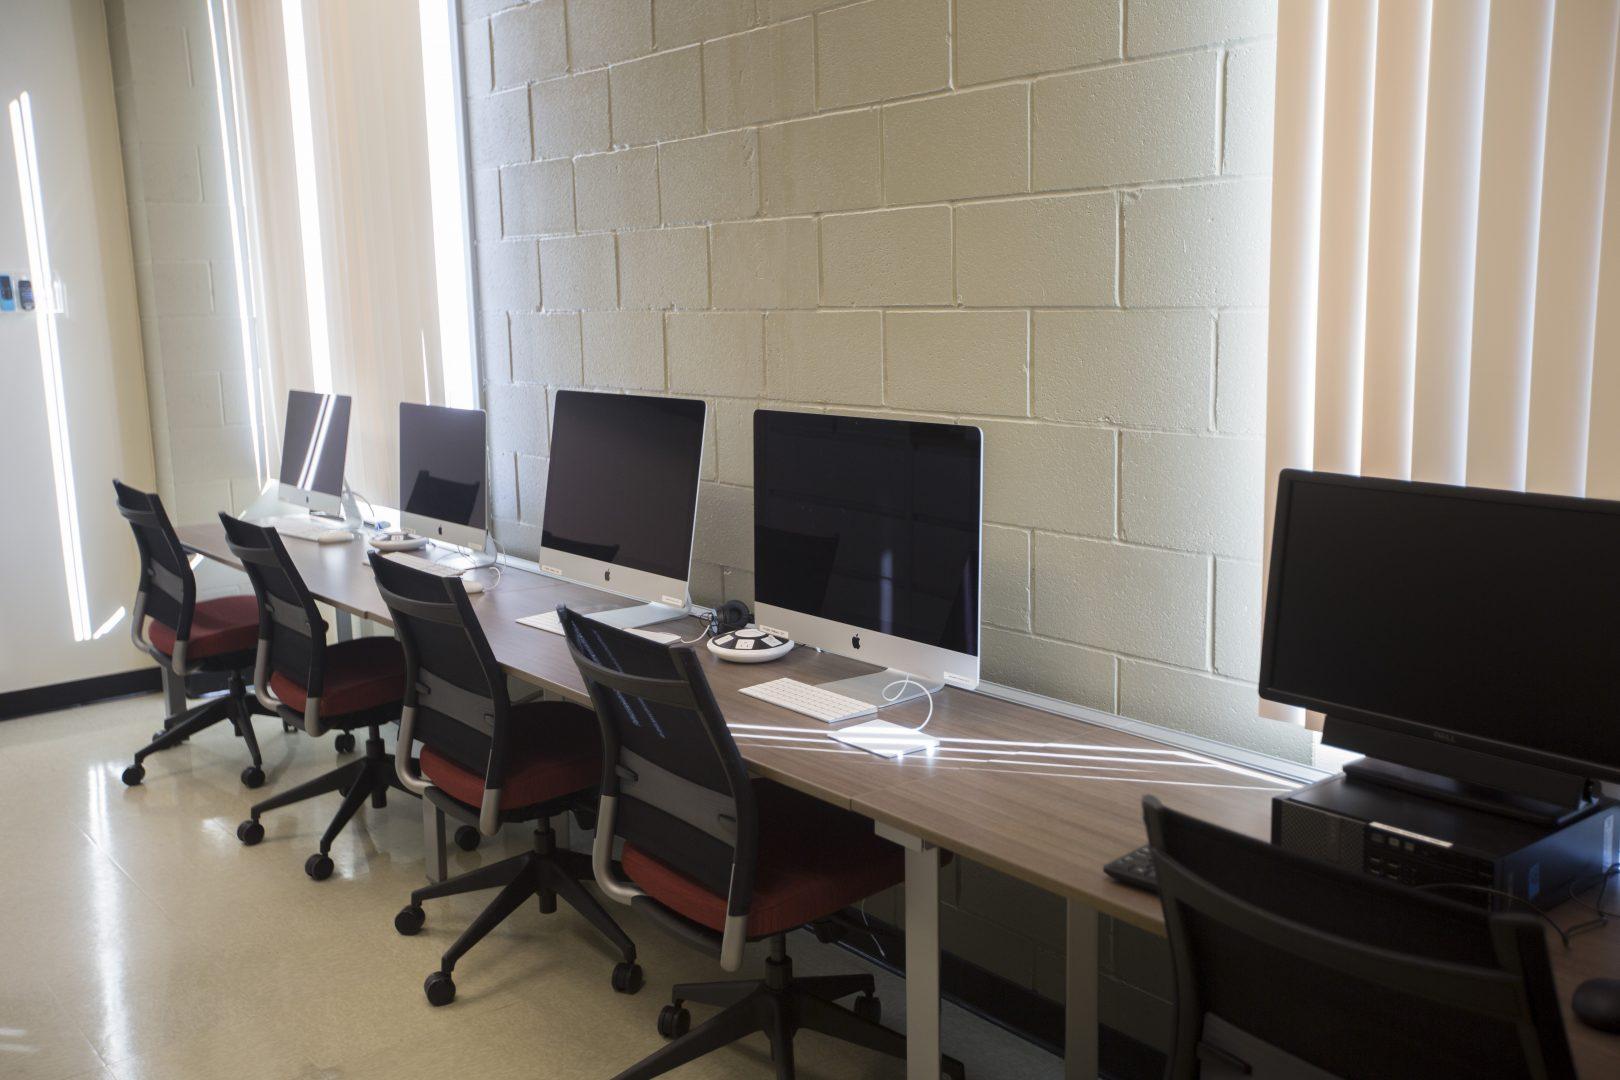 New computers and furniture were put into the criminology lab located in the Science II Building on Dec. 4, 2017. The lab was recently installed in what used to be criminology professors’ offices. (Daniel Avalos/The Collegian)